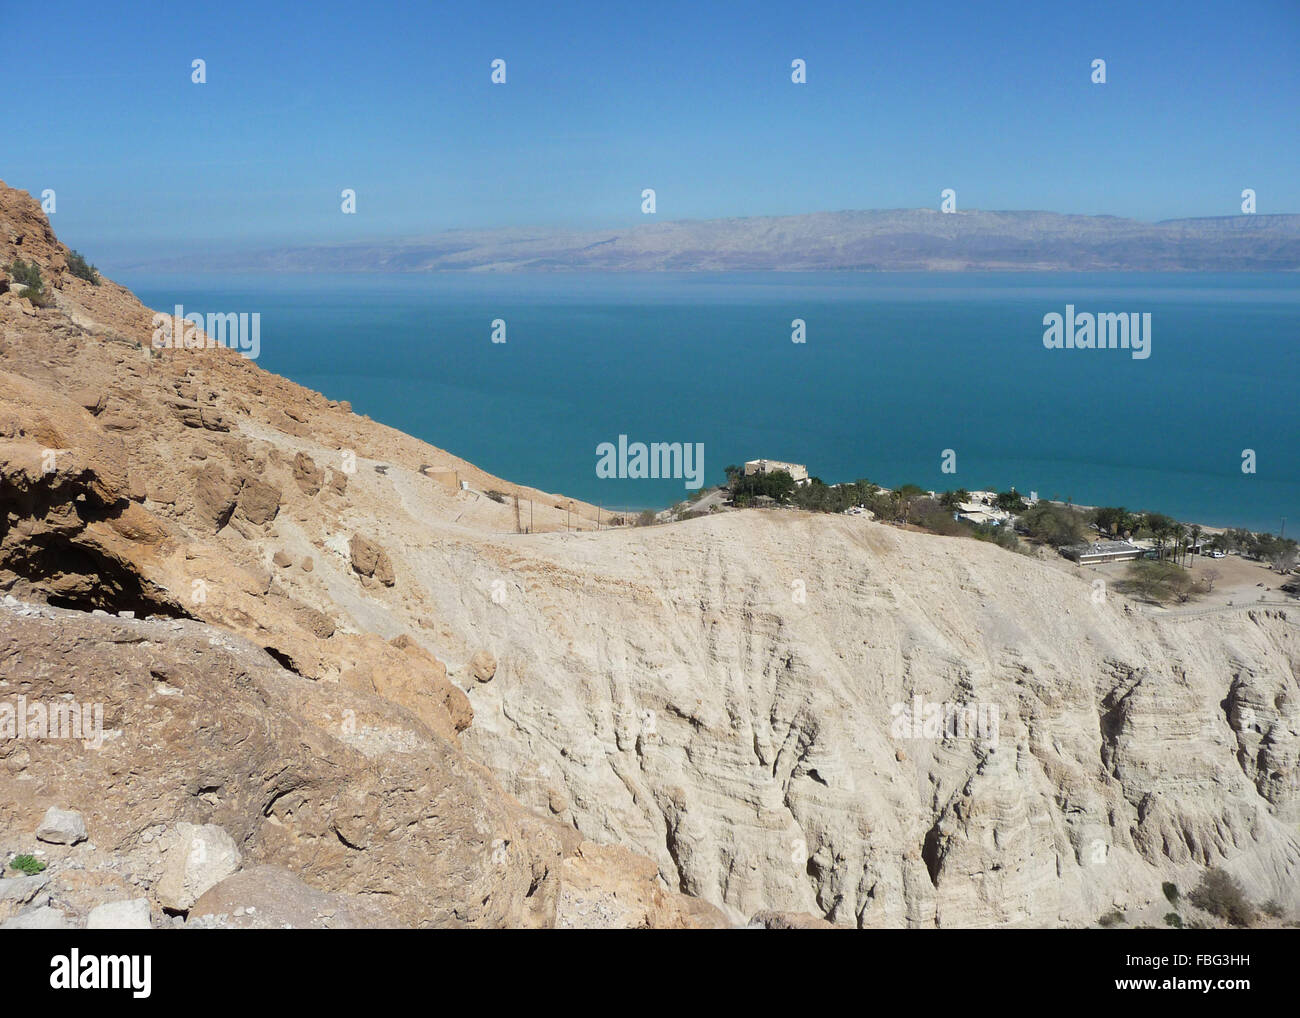 Beautiful view of the dead sea from the Ein Gedi Nature Reserve, Israel Stock Photo